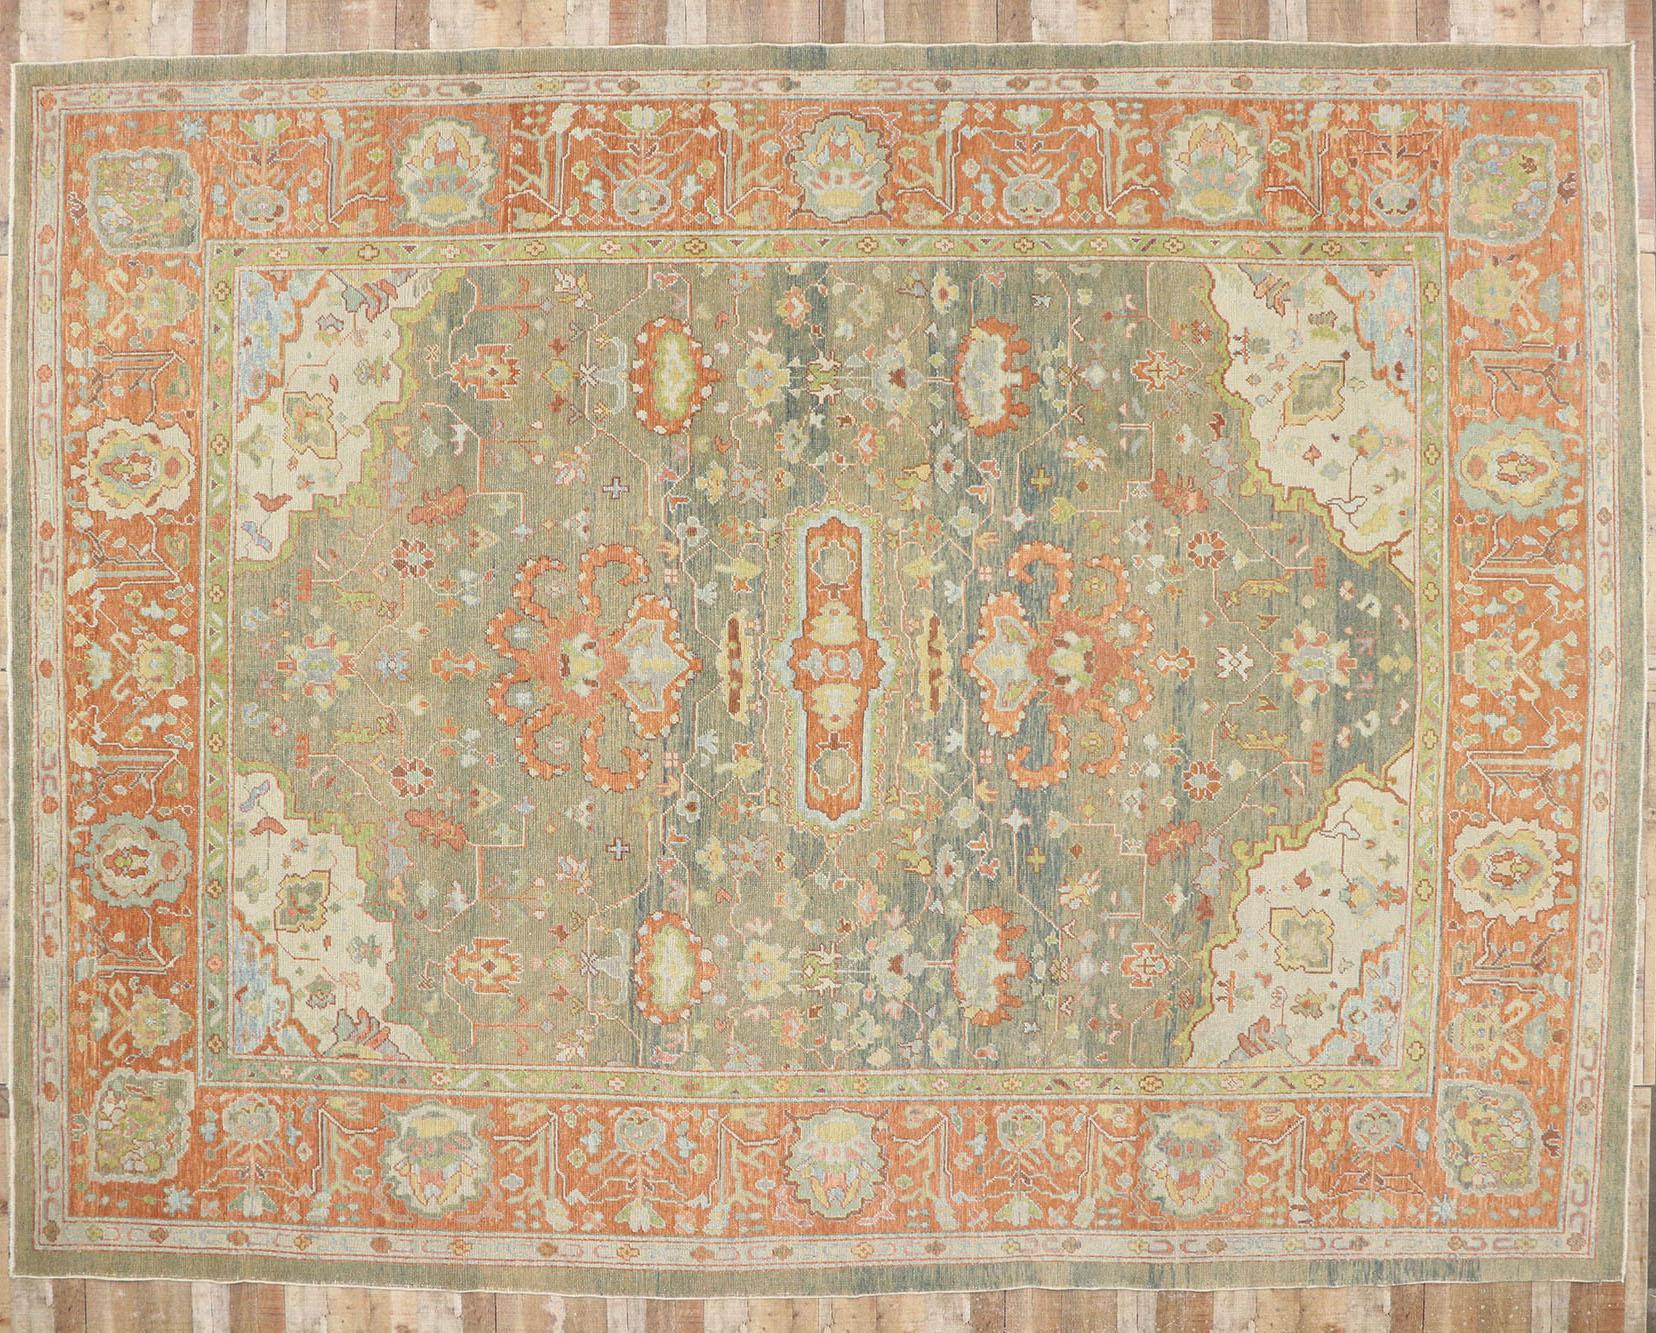 New Contemporary Turkish Oushak Rug with Modern Spanish Revival Style 3